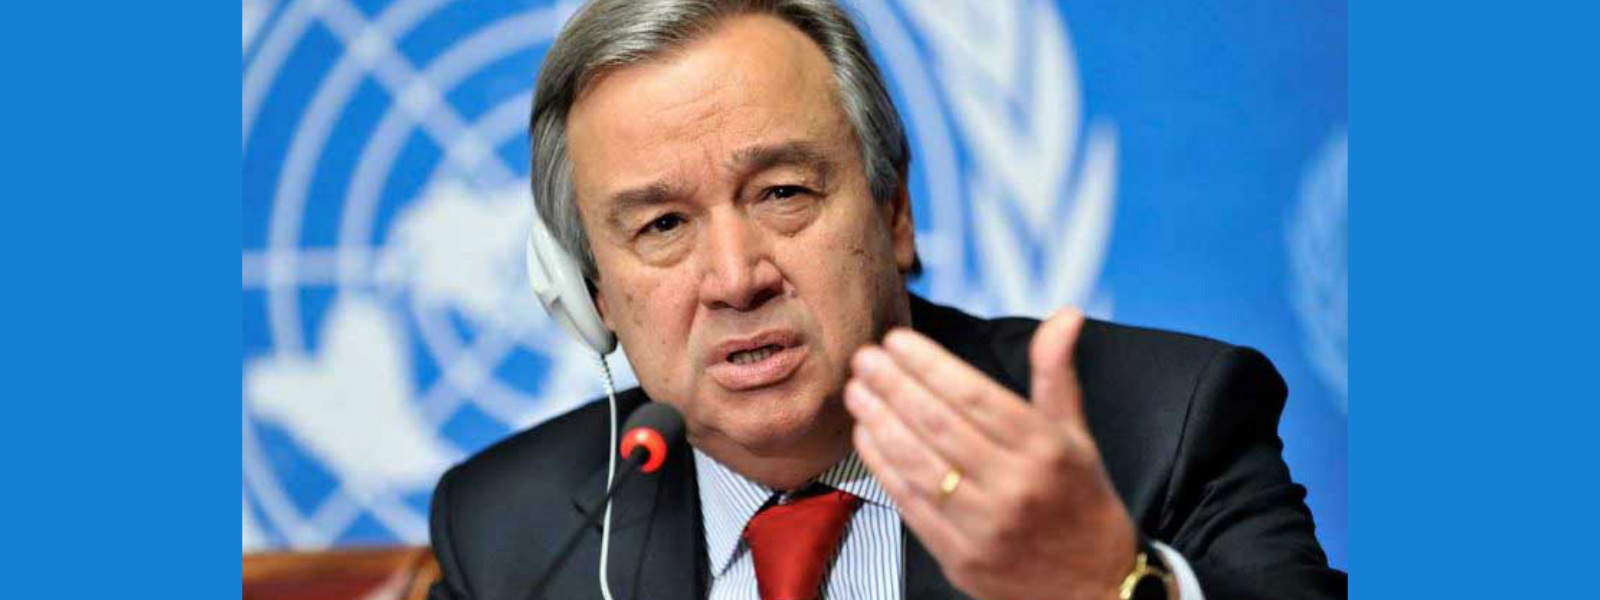 Connections through technology vital : UN Chief